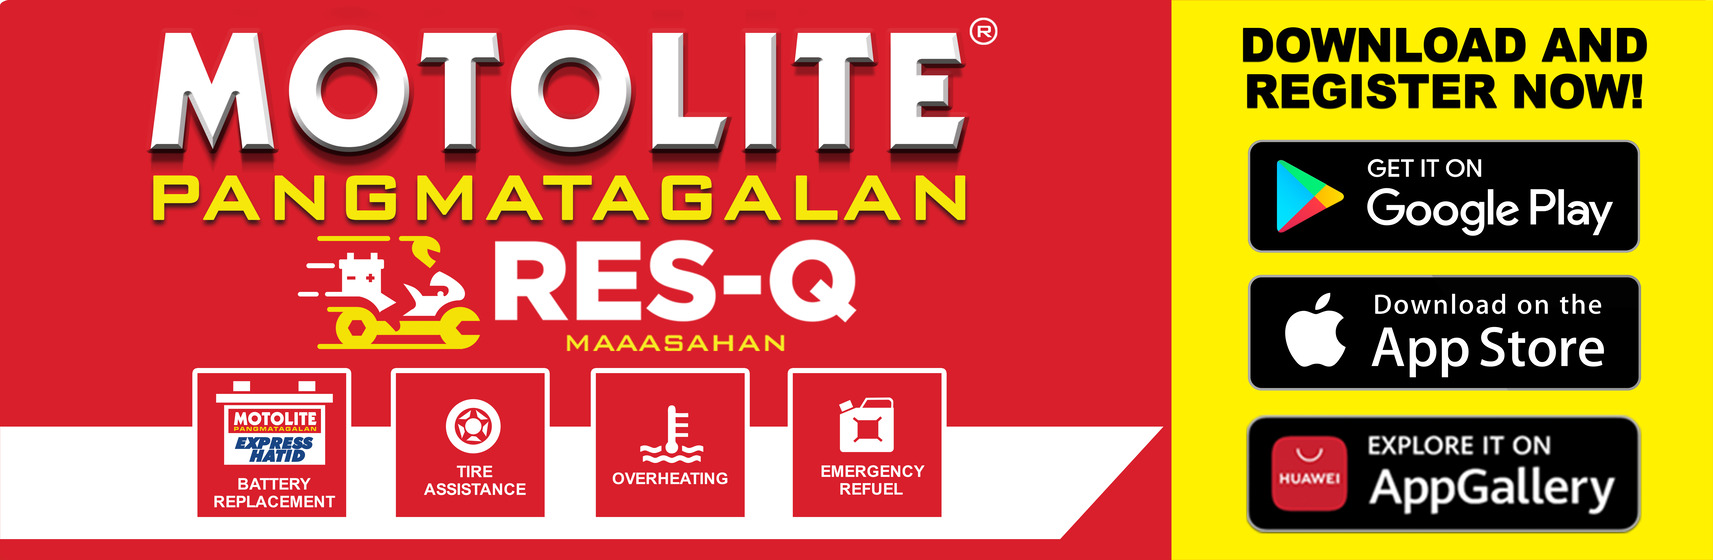 MOTOLITE SERVICES AT YOUR FINGERTIPS: EXPRESS HATID, RES-Q AND MORE